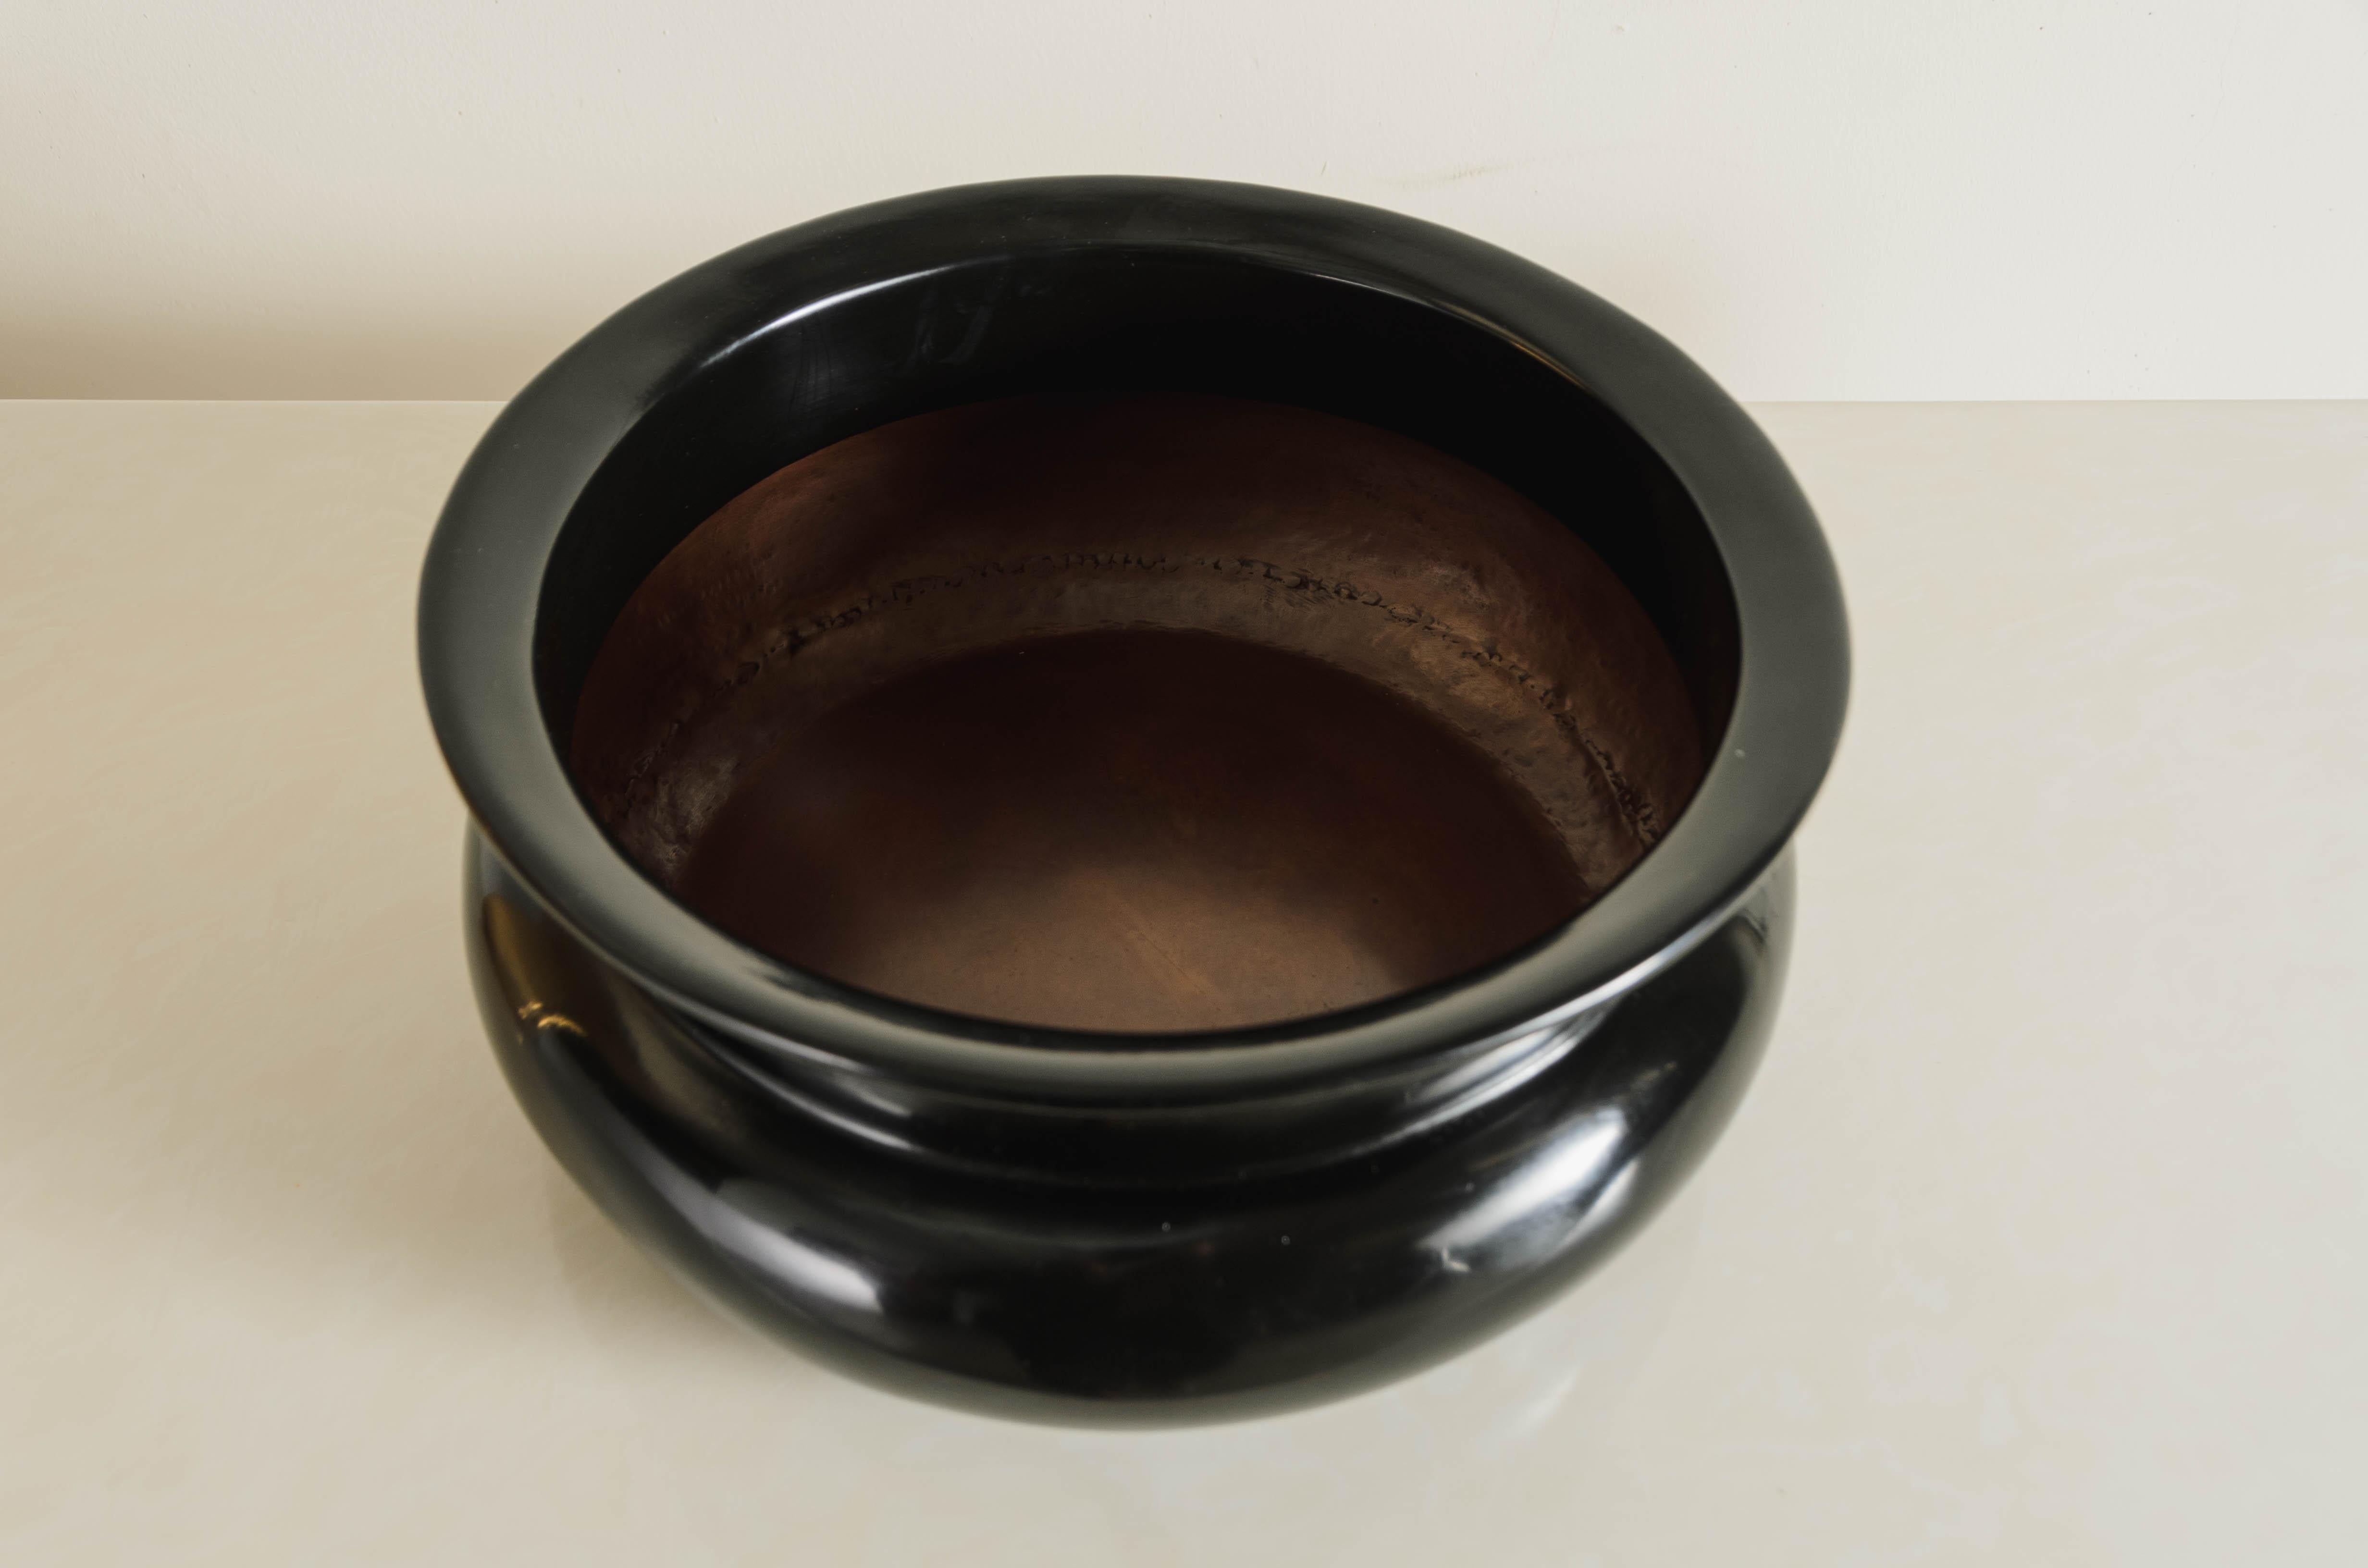 Repoussé Contemporary Ding Pot in Black Lacquer by Robert Kuo, Limited Edition